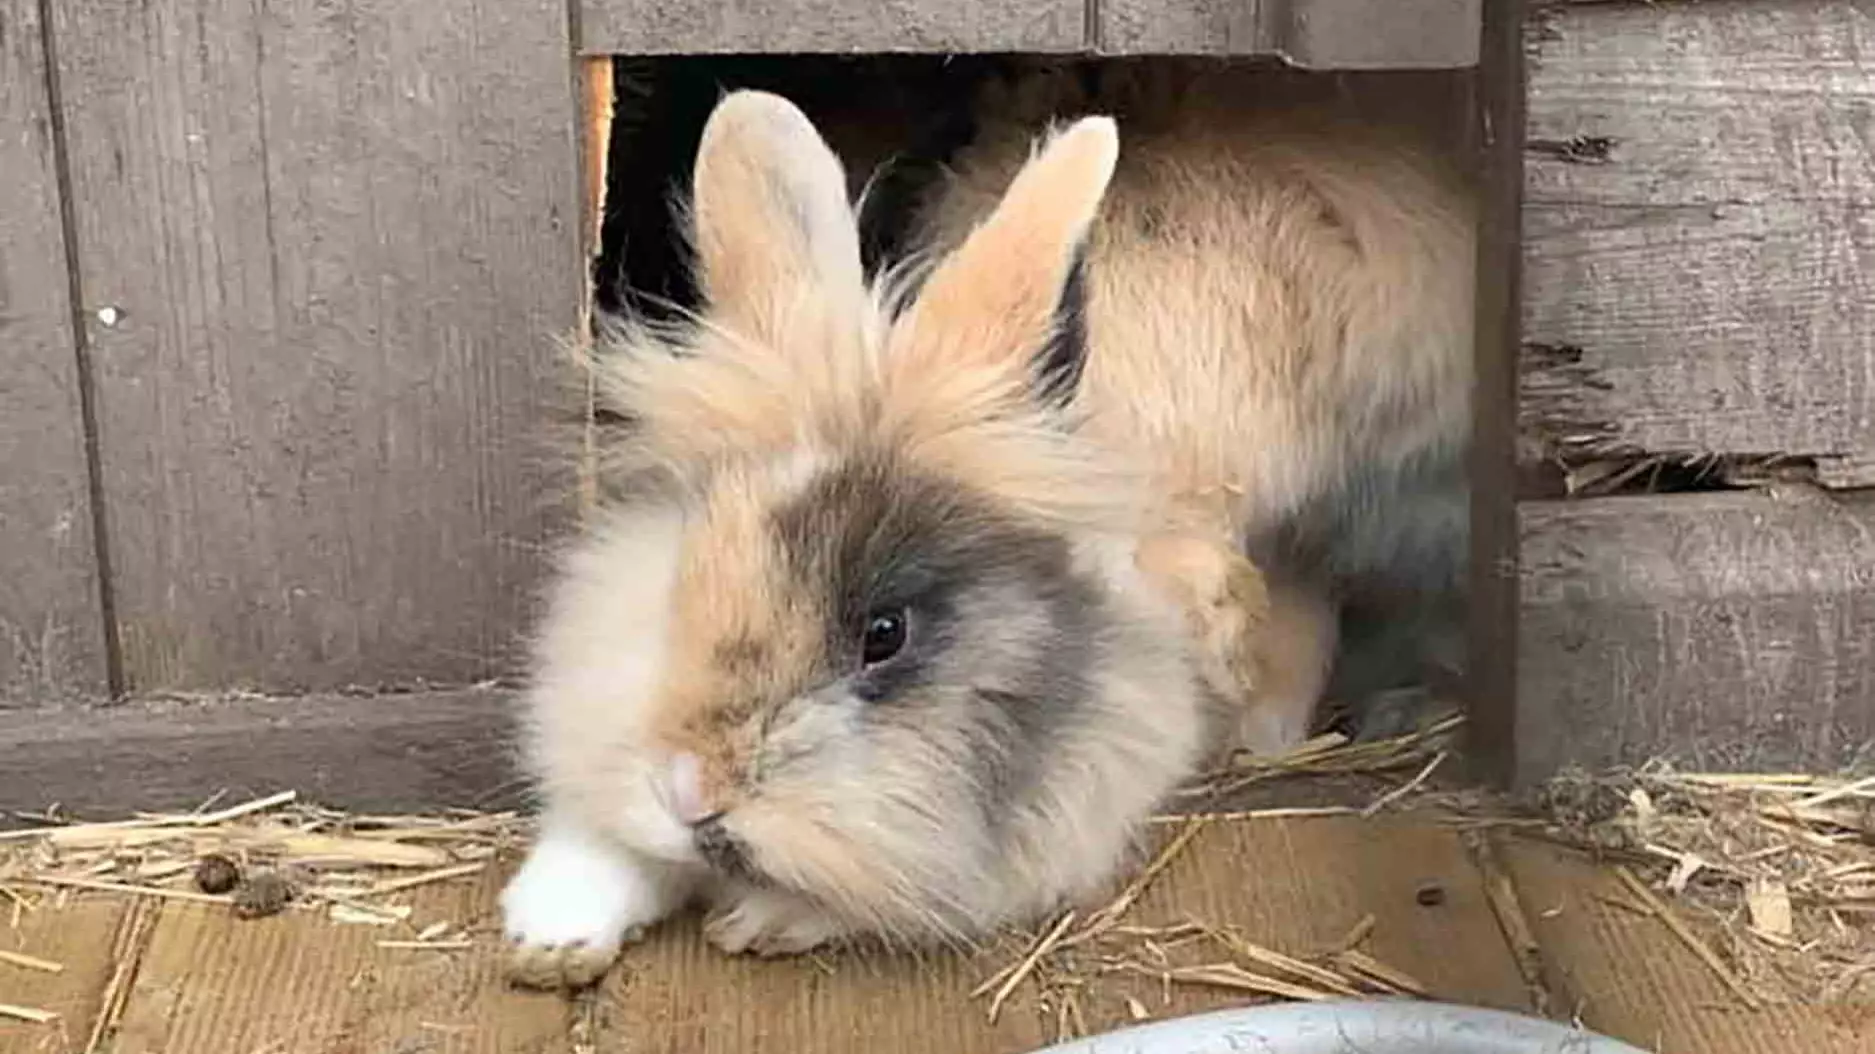 Devastated Pet Owner Says Rabbit Died Due To Fright From 'Bomb-Like Fireworks'